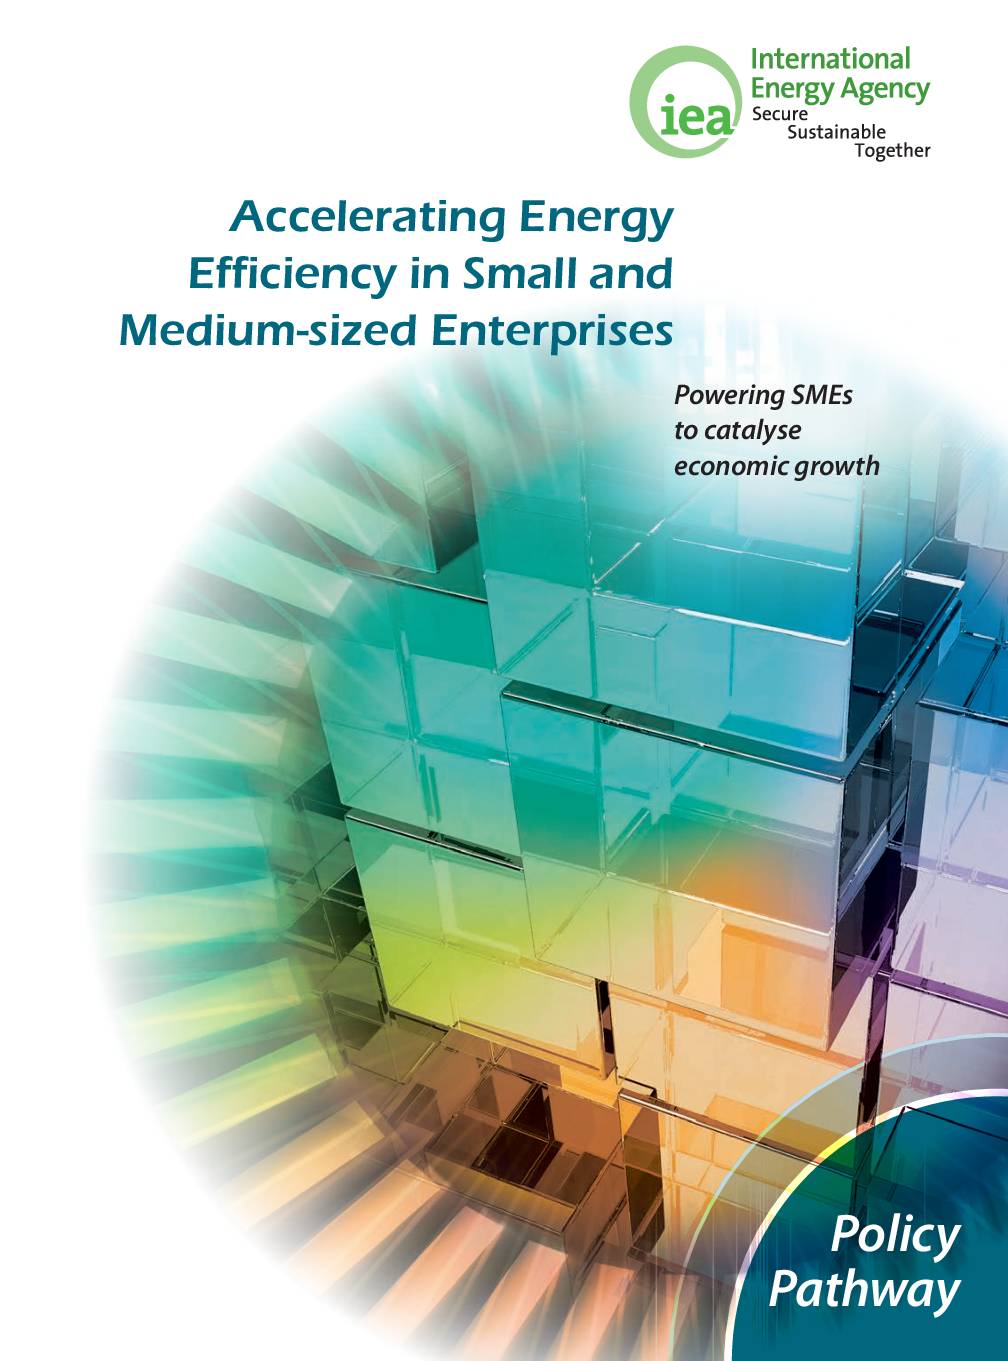 Accelerating Energy Efficiency in Small and Medium-sized Enterprises: Powering SMEs to catalyse economic growth